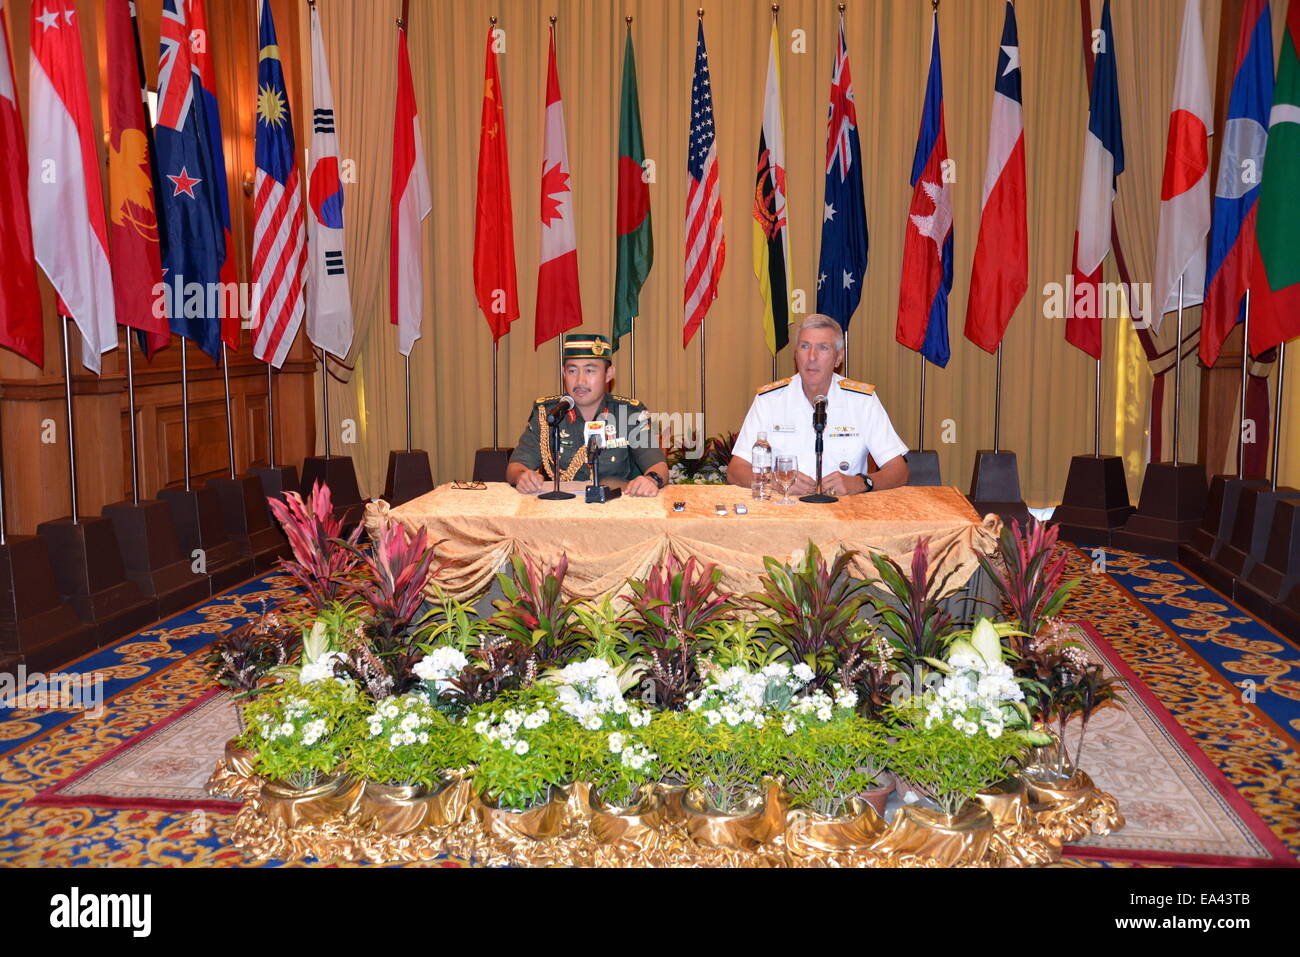 (141106) -- BANDAR SERI BEGAWAN, Nov. 6 (Xinhua) -- Major General Dato Paduka Seri Mohd Tawih bin Abdullah (L), commander of the Royal Brunei Armed Forces, and Admiral Samuel Locklear, commander of the U.S. Pacific Command, cochair a joint press conference after Chiefs of Defense Forces Conference (CHOD) 2014 in Bandar Seri Begawan, Brunei, Nov. 6, 2014. The four-day CHOD 2014 concluded here Thursday, highlighting the importance of cooperation in striving for peace and prosperity, especially with the presence of non-traditional threats. (Xinhua/Zheng Jie)(bxq) Stock Photo